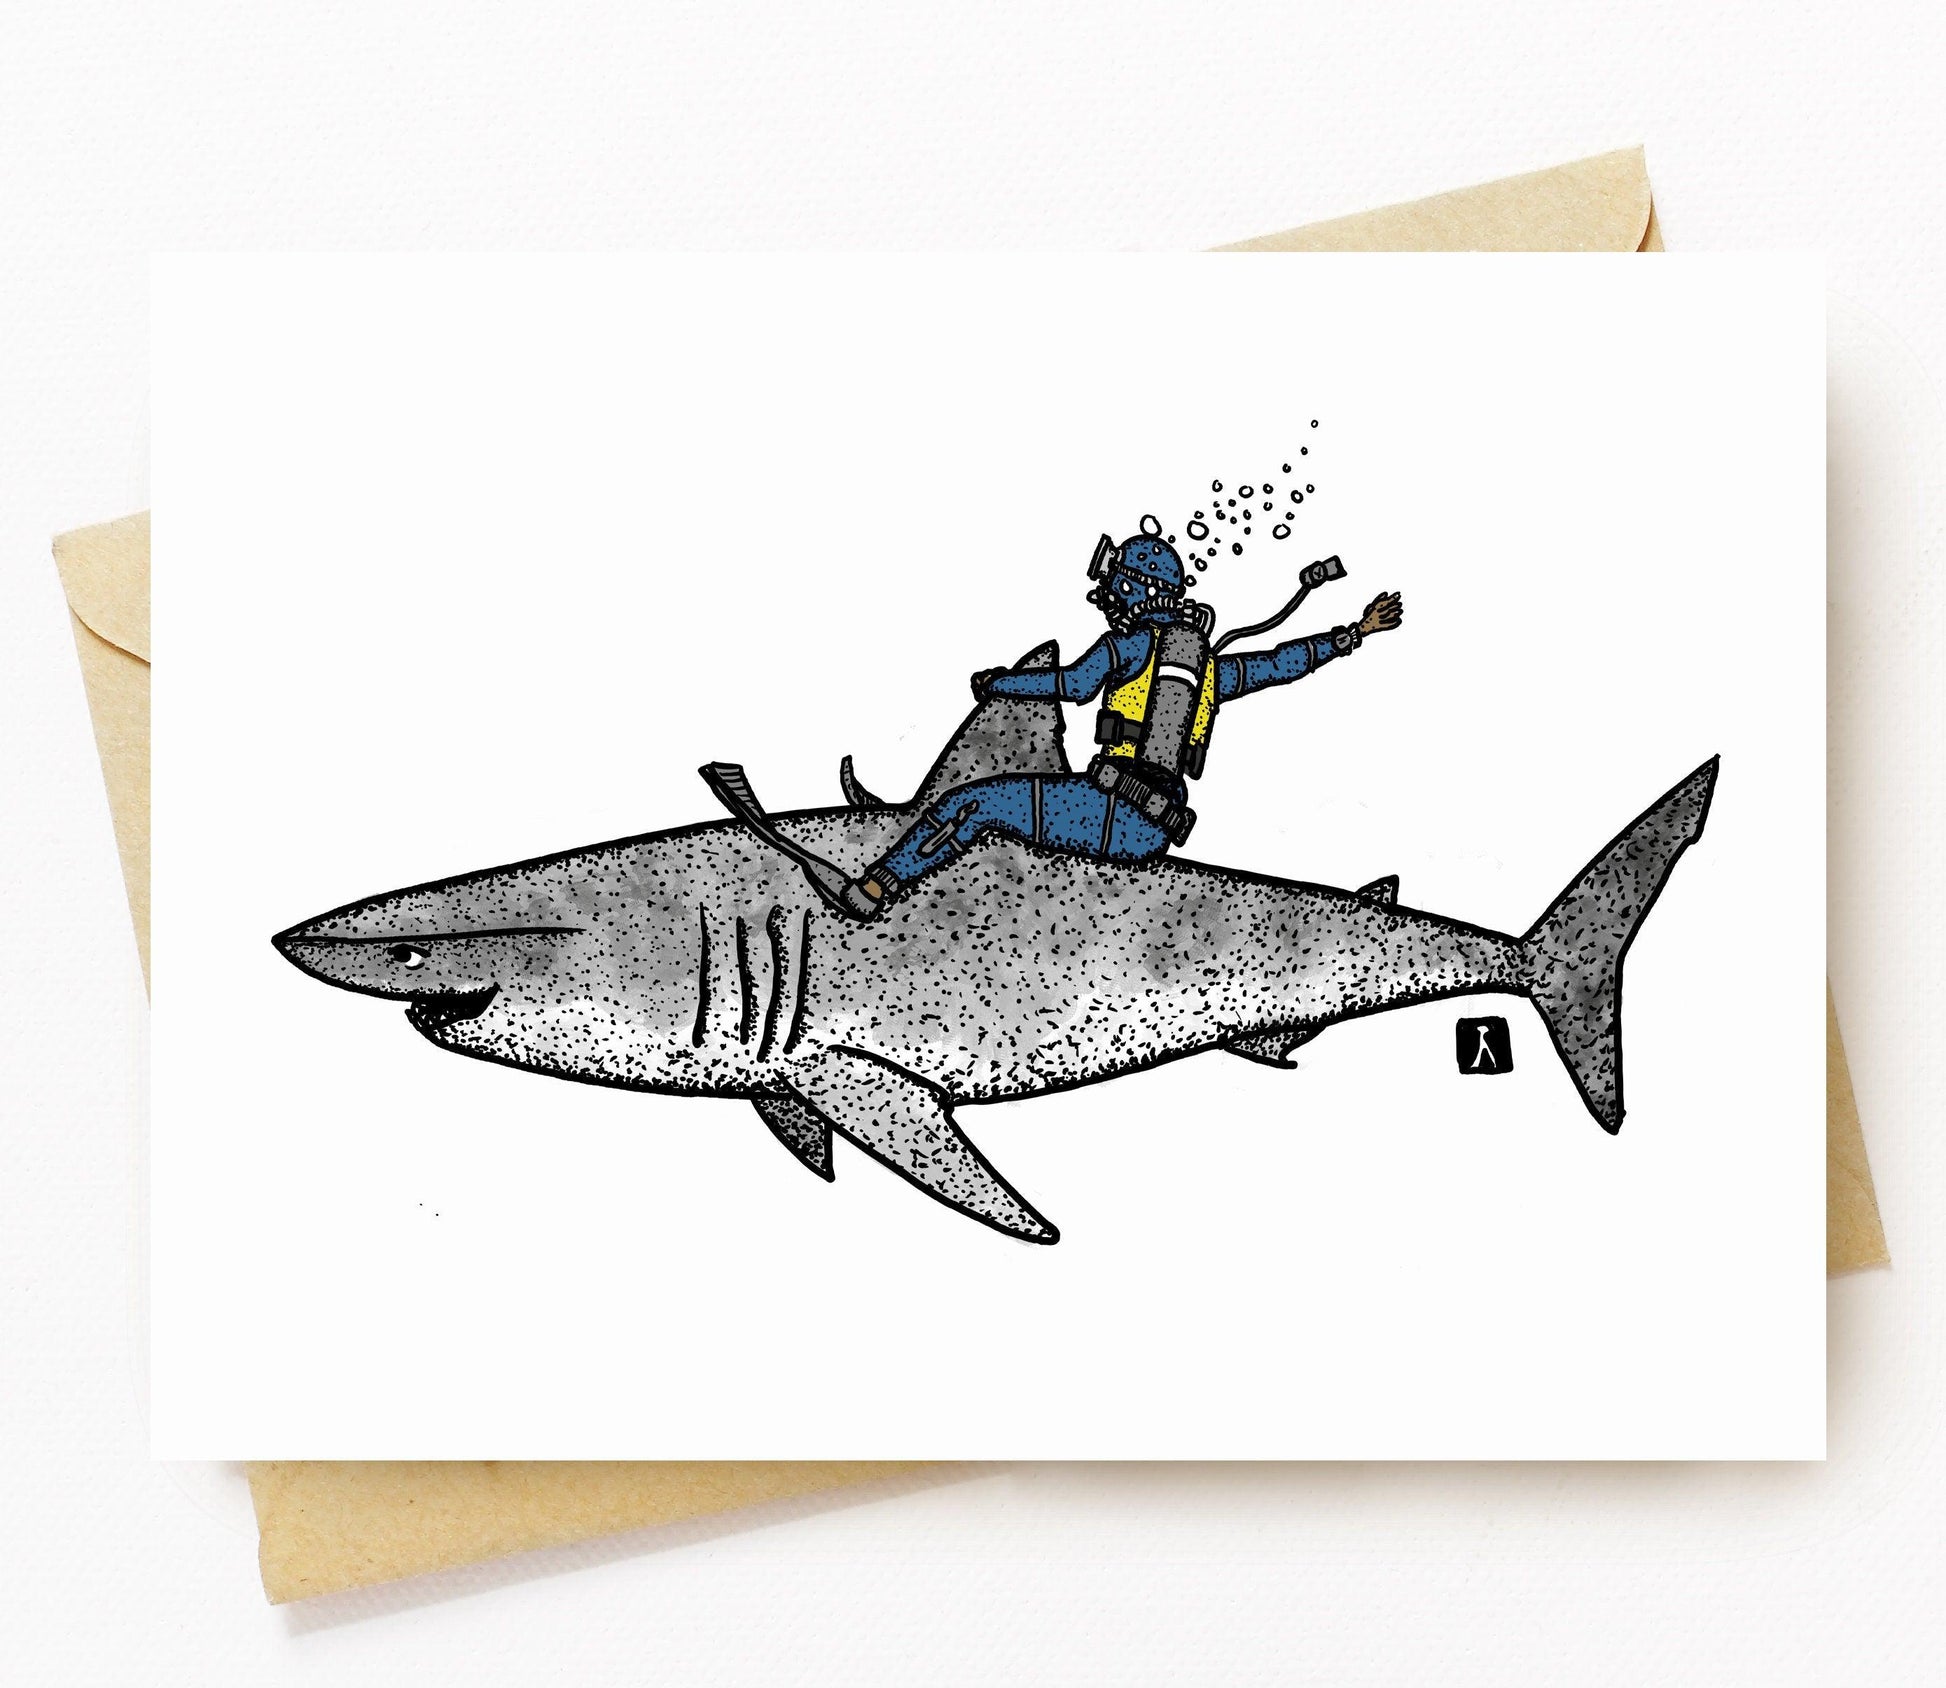 BellavanceInk: Greeting Card With Scuba Diver Riding Bronco On A Great White Shark Pen & Ink Watercolor Illustration 5 x 7 Inches - BellavanceInk